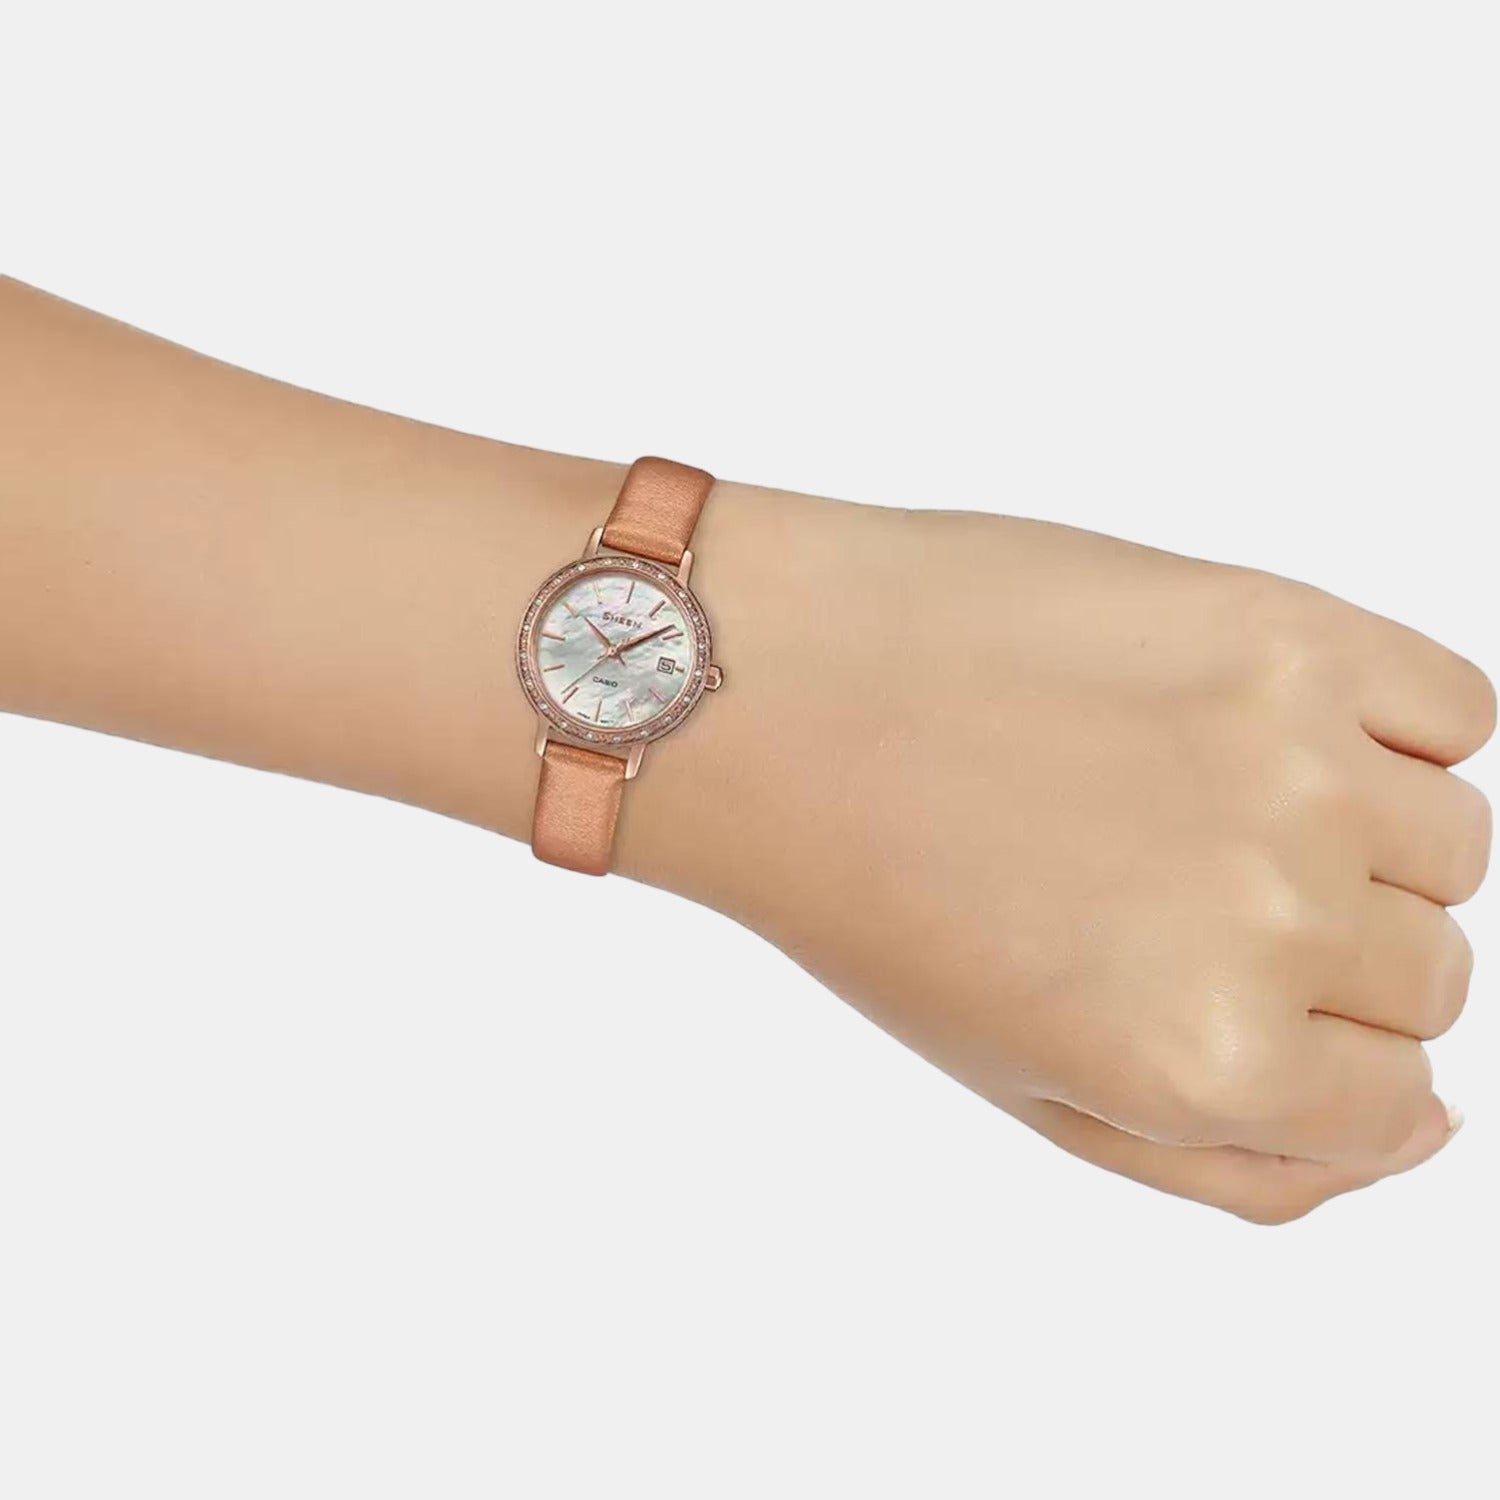 casio-stainless-steel-rose-gold-analog-womens-watch-watch-sh226